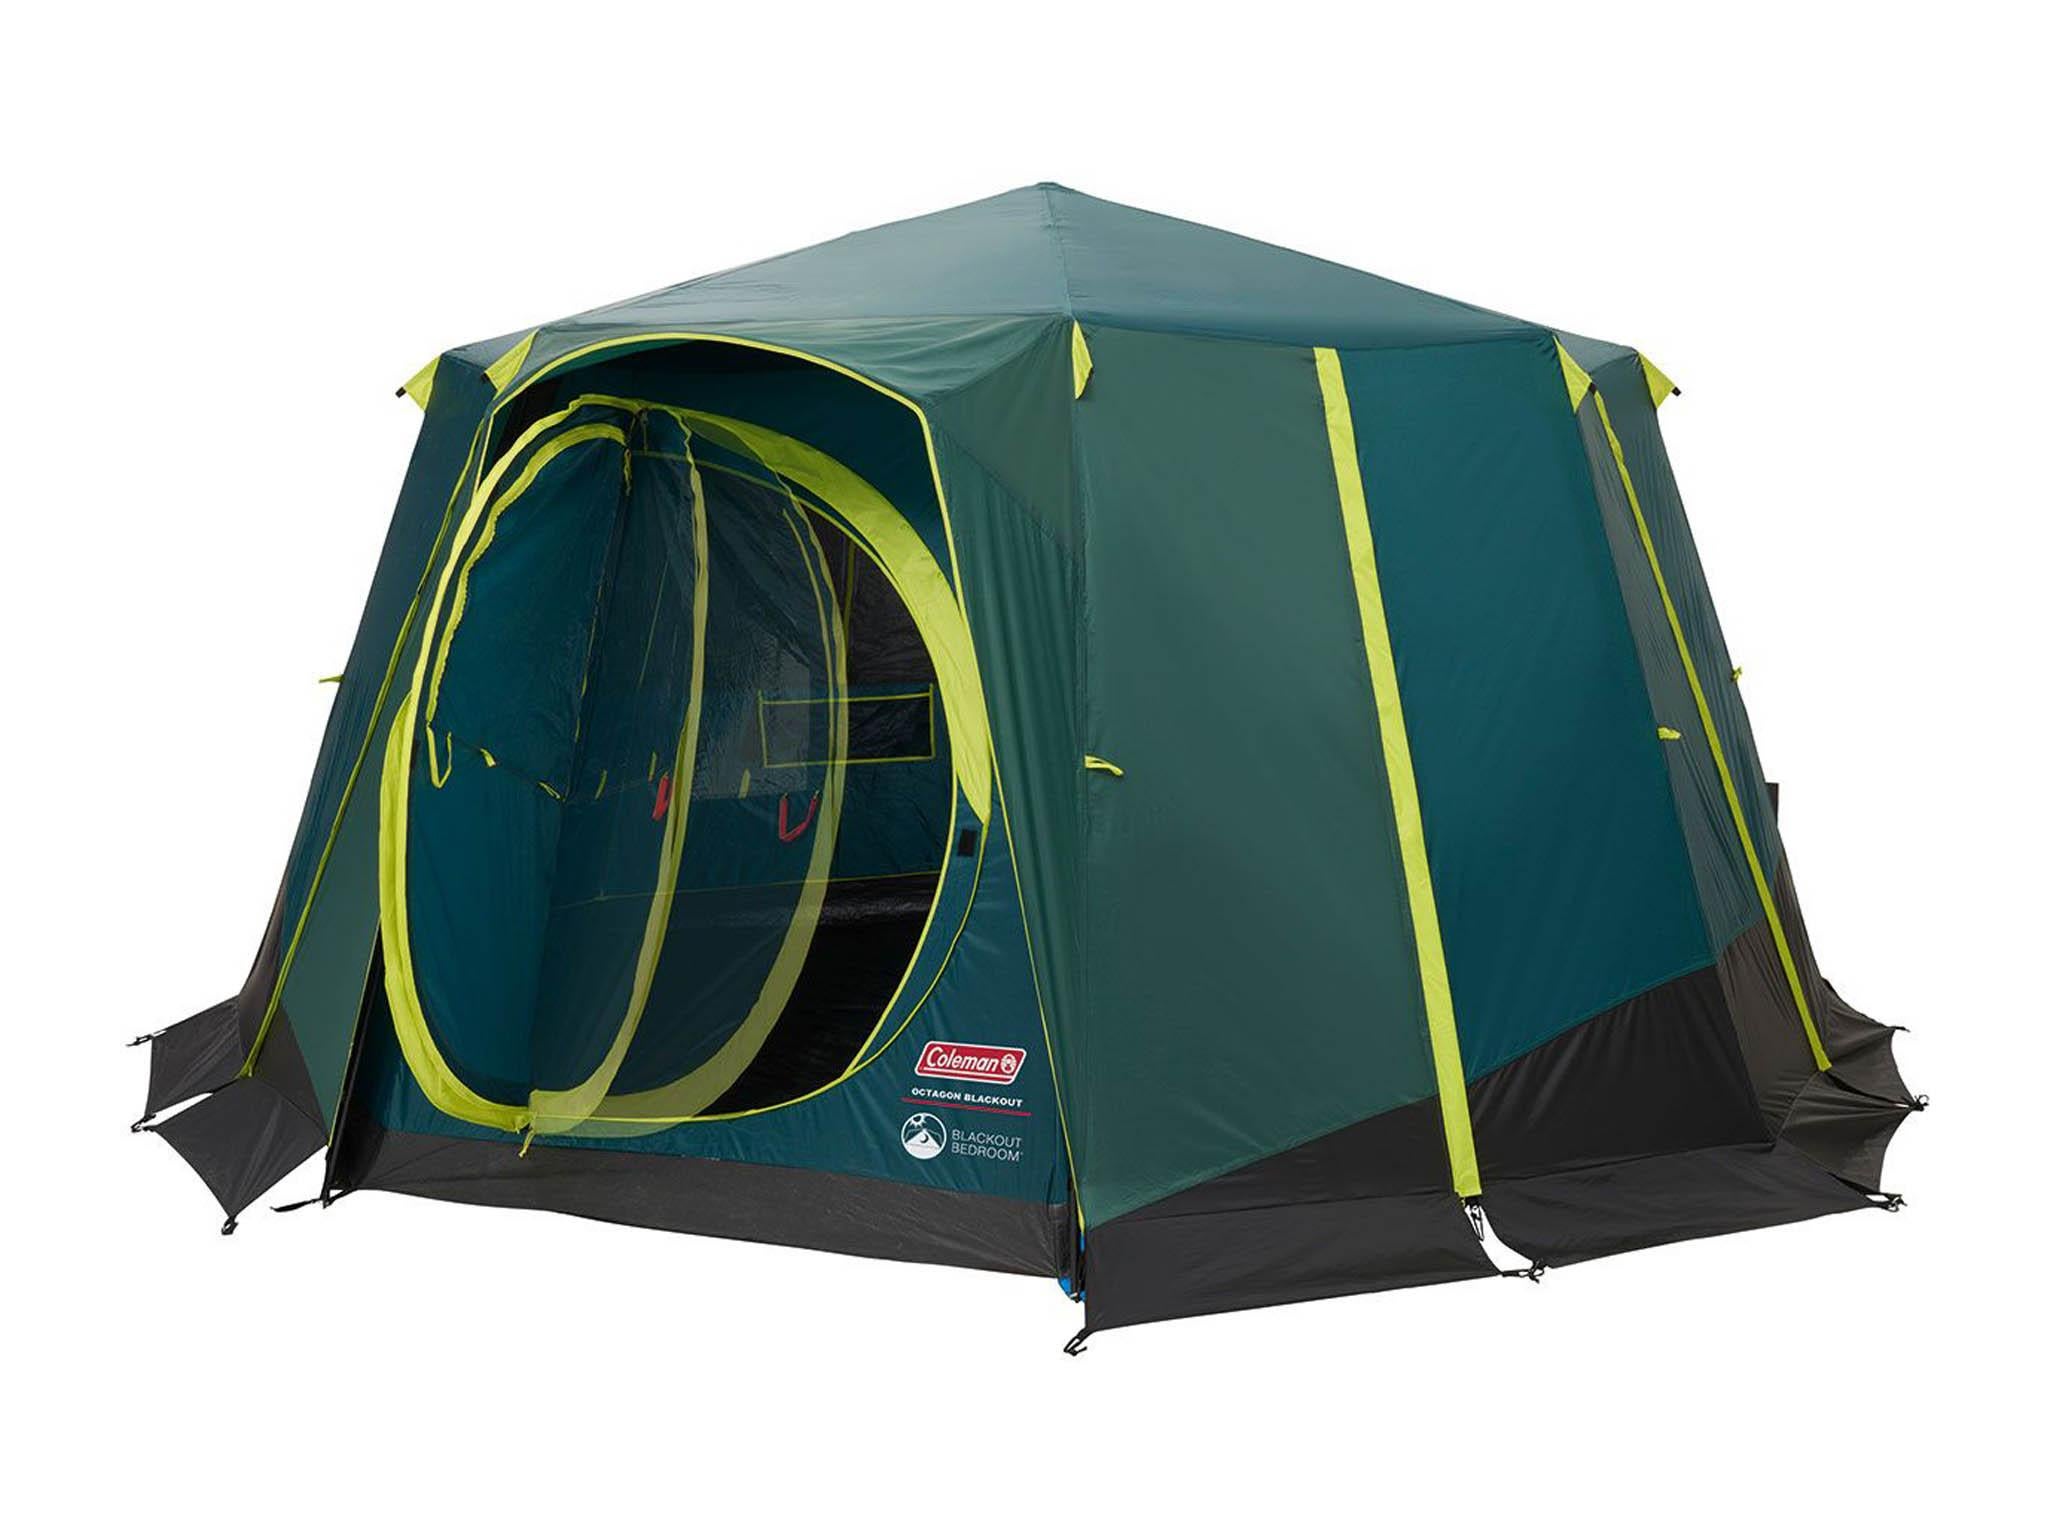 Coleman Tent Automatic Tent Double-Decker Multi-Hexagon Tent 5 to 8 Man Festival Tent 100/% Waterproof Family Camping Tent with Sewn in Groundsheet